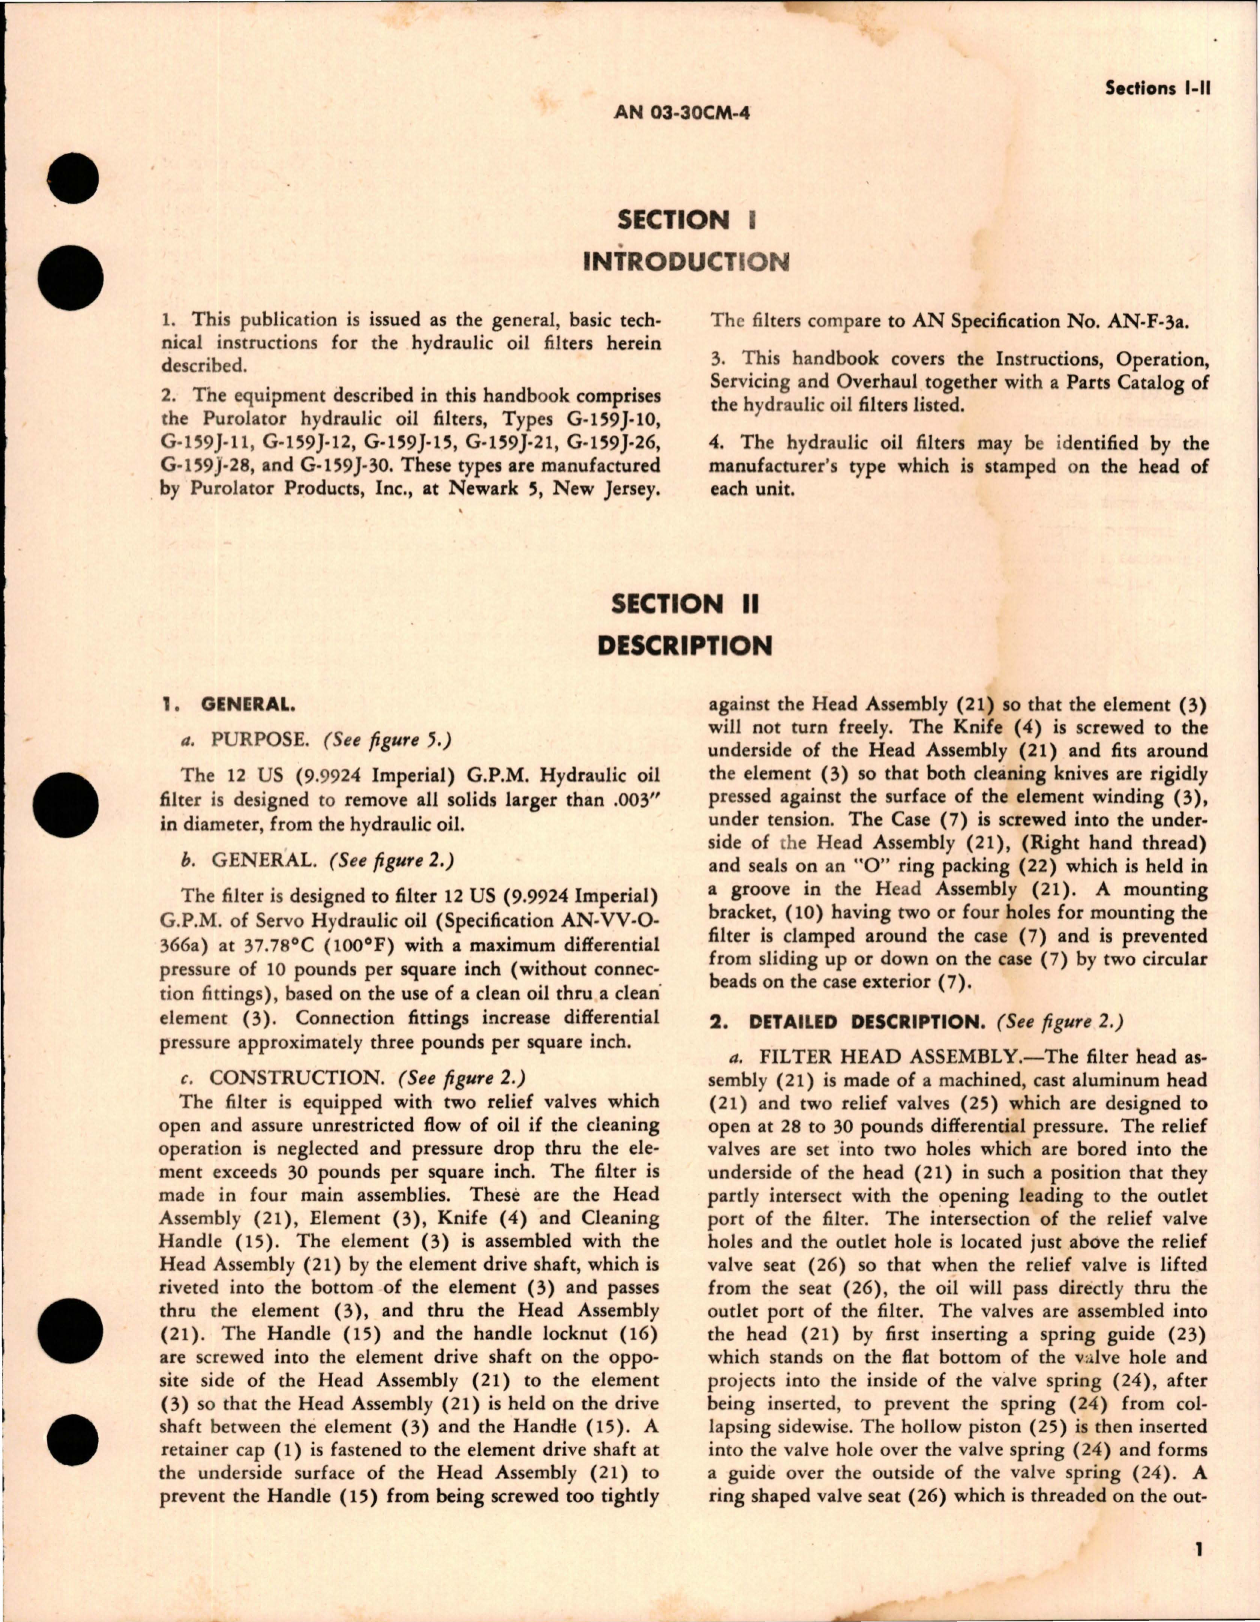 Sample page 7 from AirCorps Library document: Operation, Service and Overhaul Instructions with Parts Catalog for Hydraulic Oil Filters 